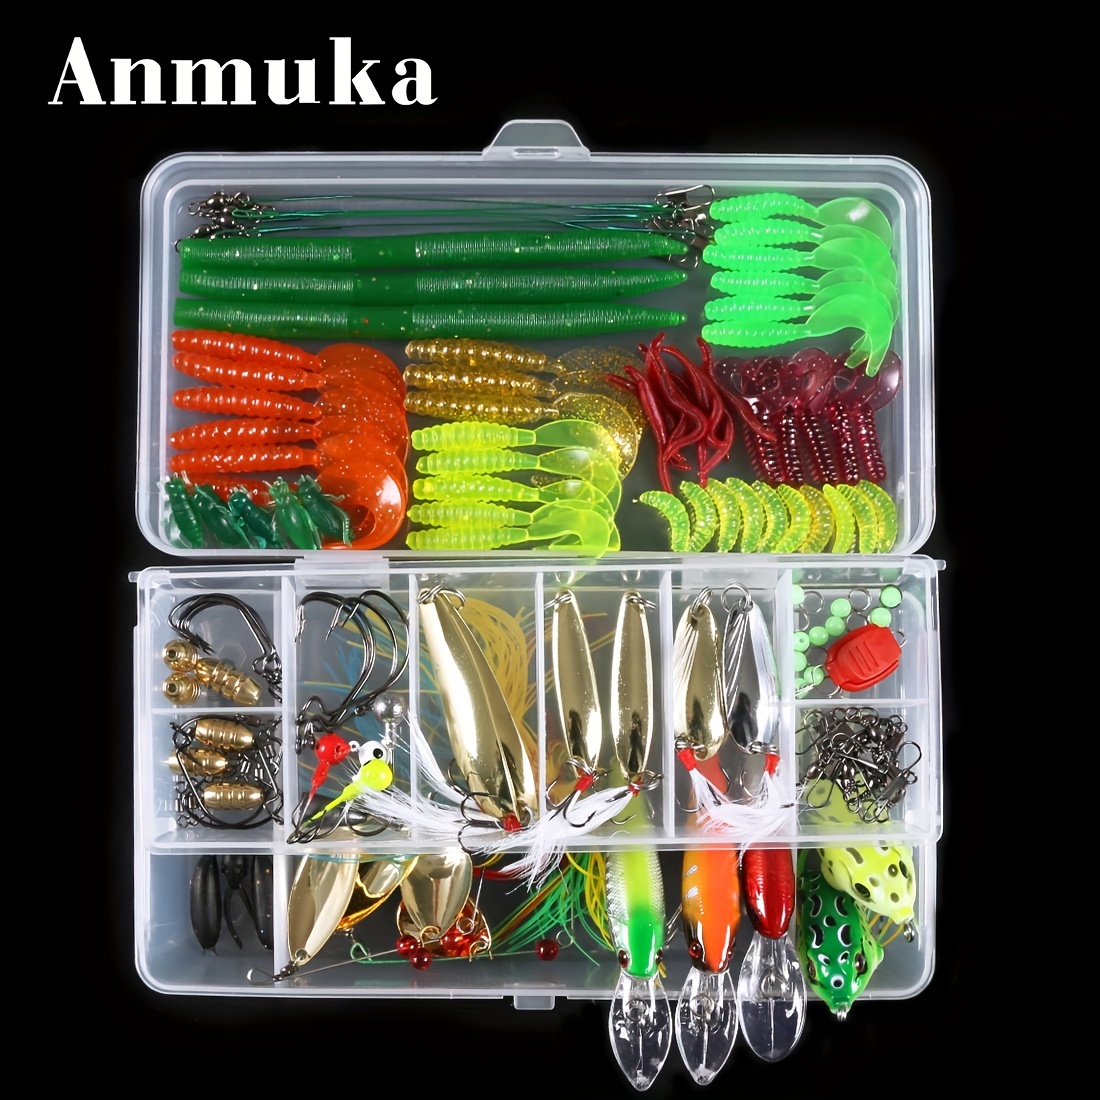 High Quality Soft Bait Lure Kit for Grass Carp Catfish and More Fishing